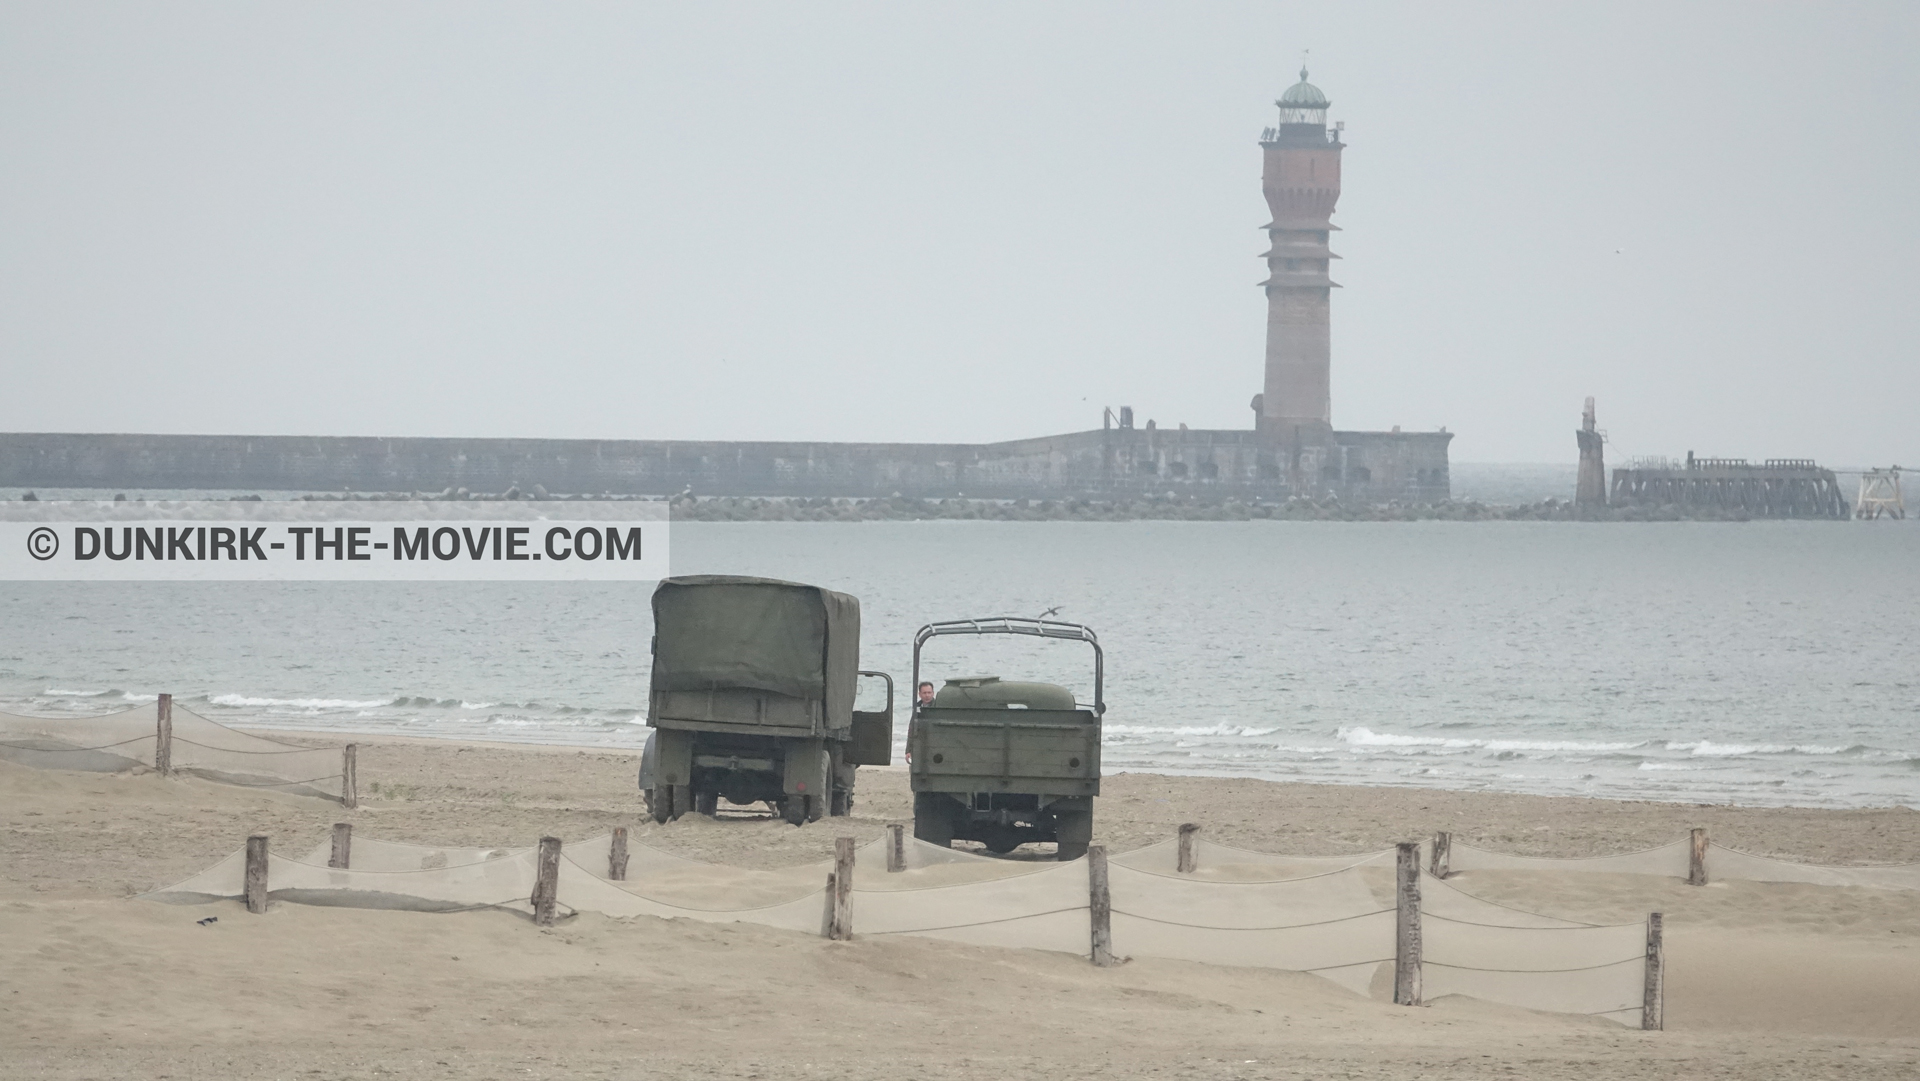 Picture with truck, St Pol sur Mer lighthouse, beach,  from behind the scene of the Dunkirk movie by Nolan